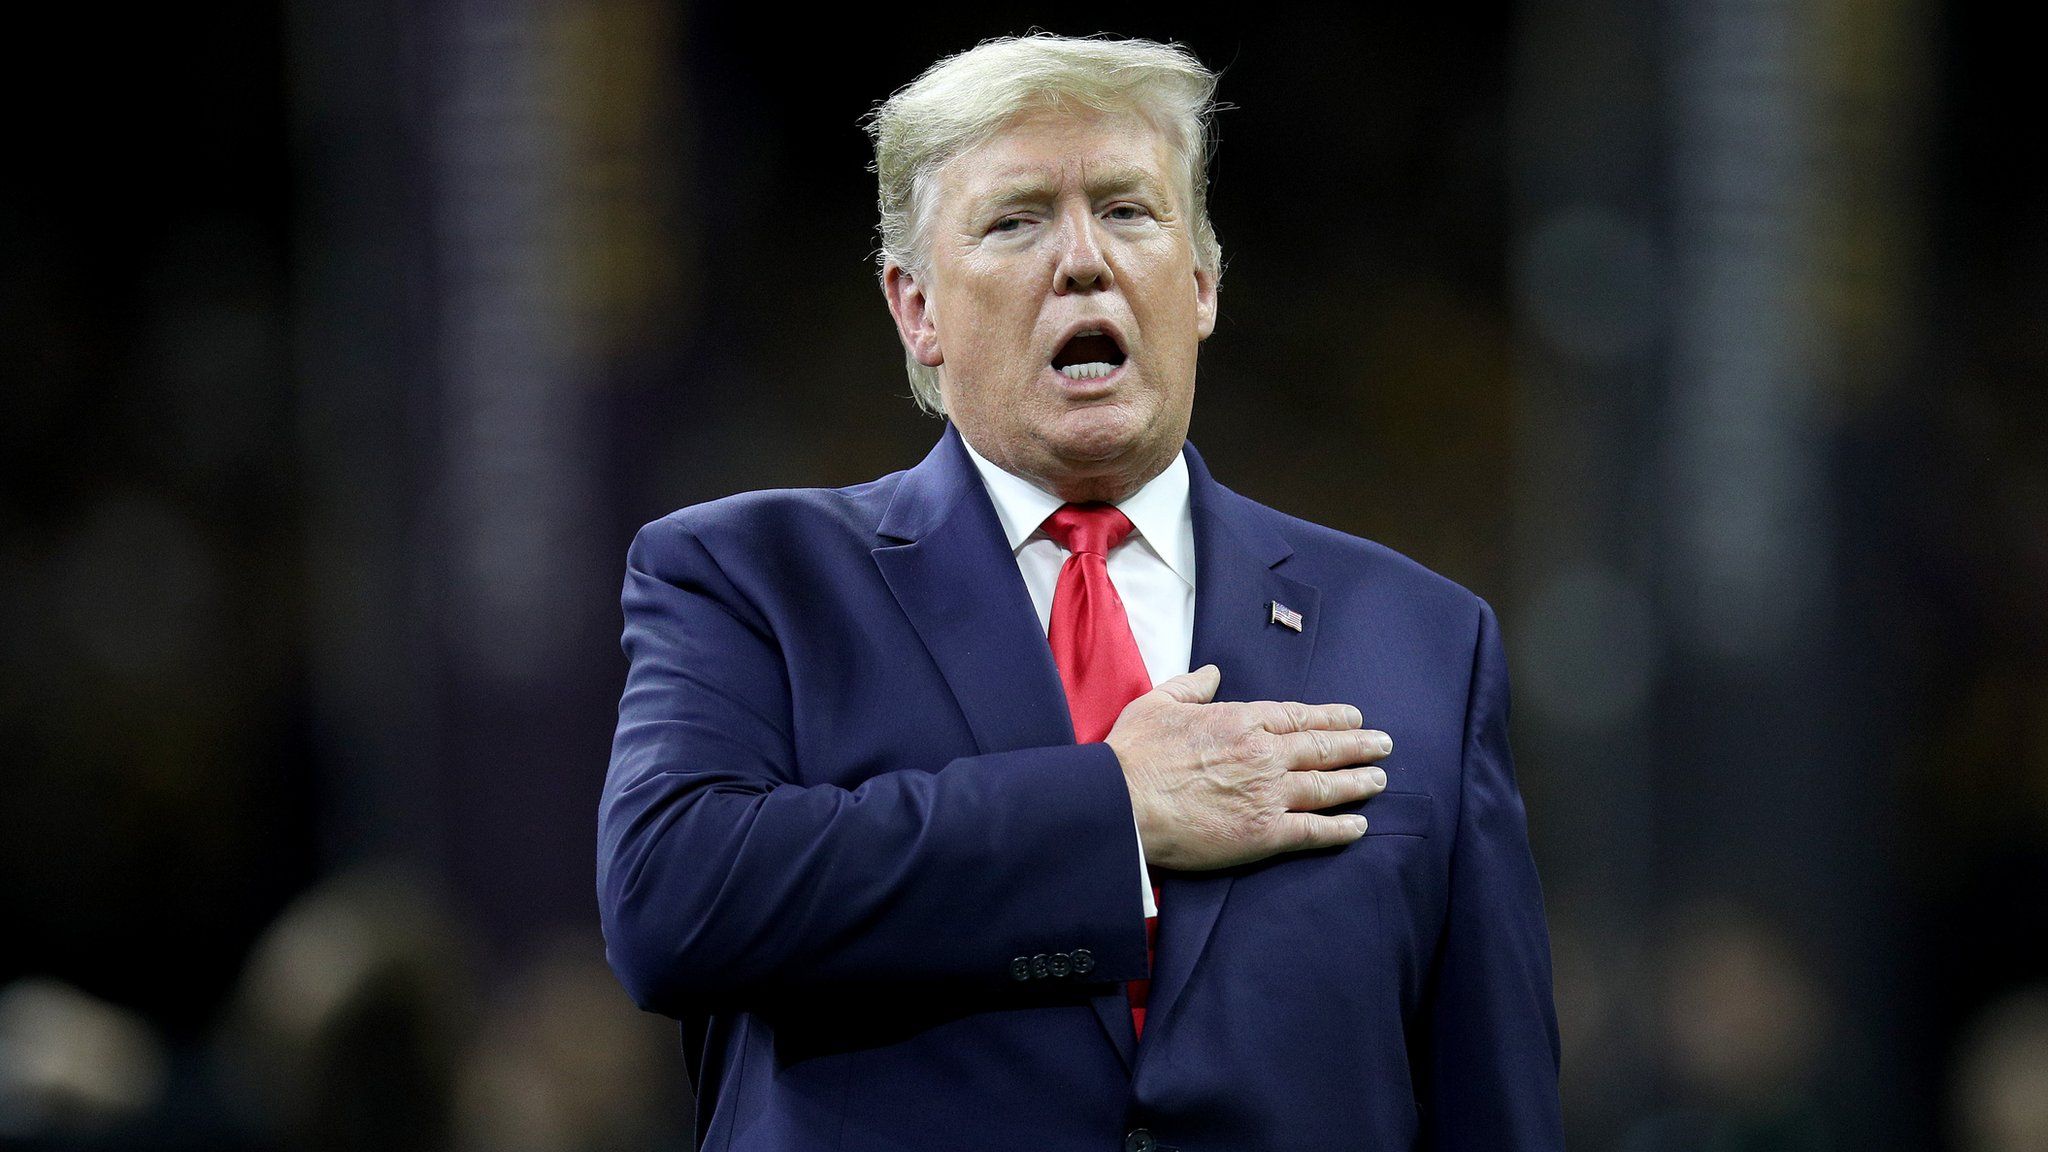 US President Donald Trump stands for the national anthem at a football game in New Orleans, Louisiana, on 13 January 2013